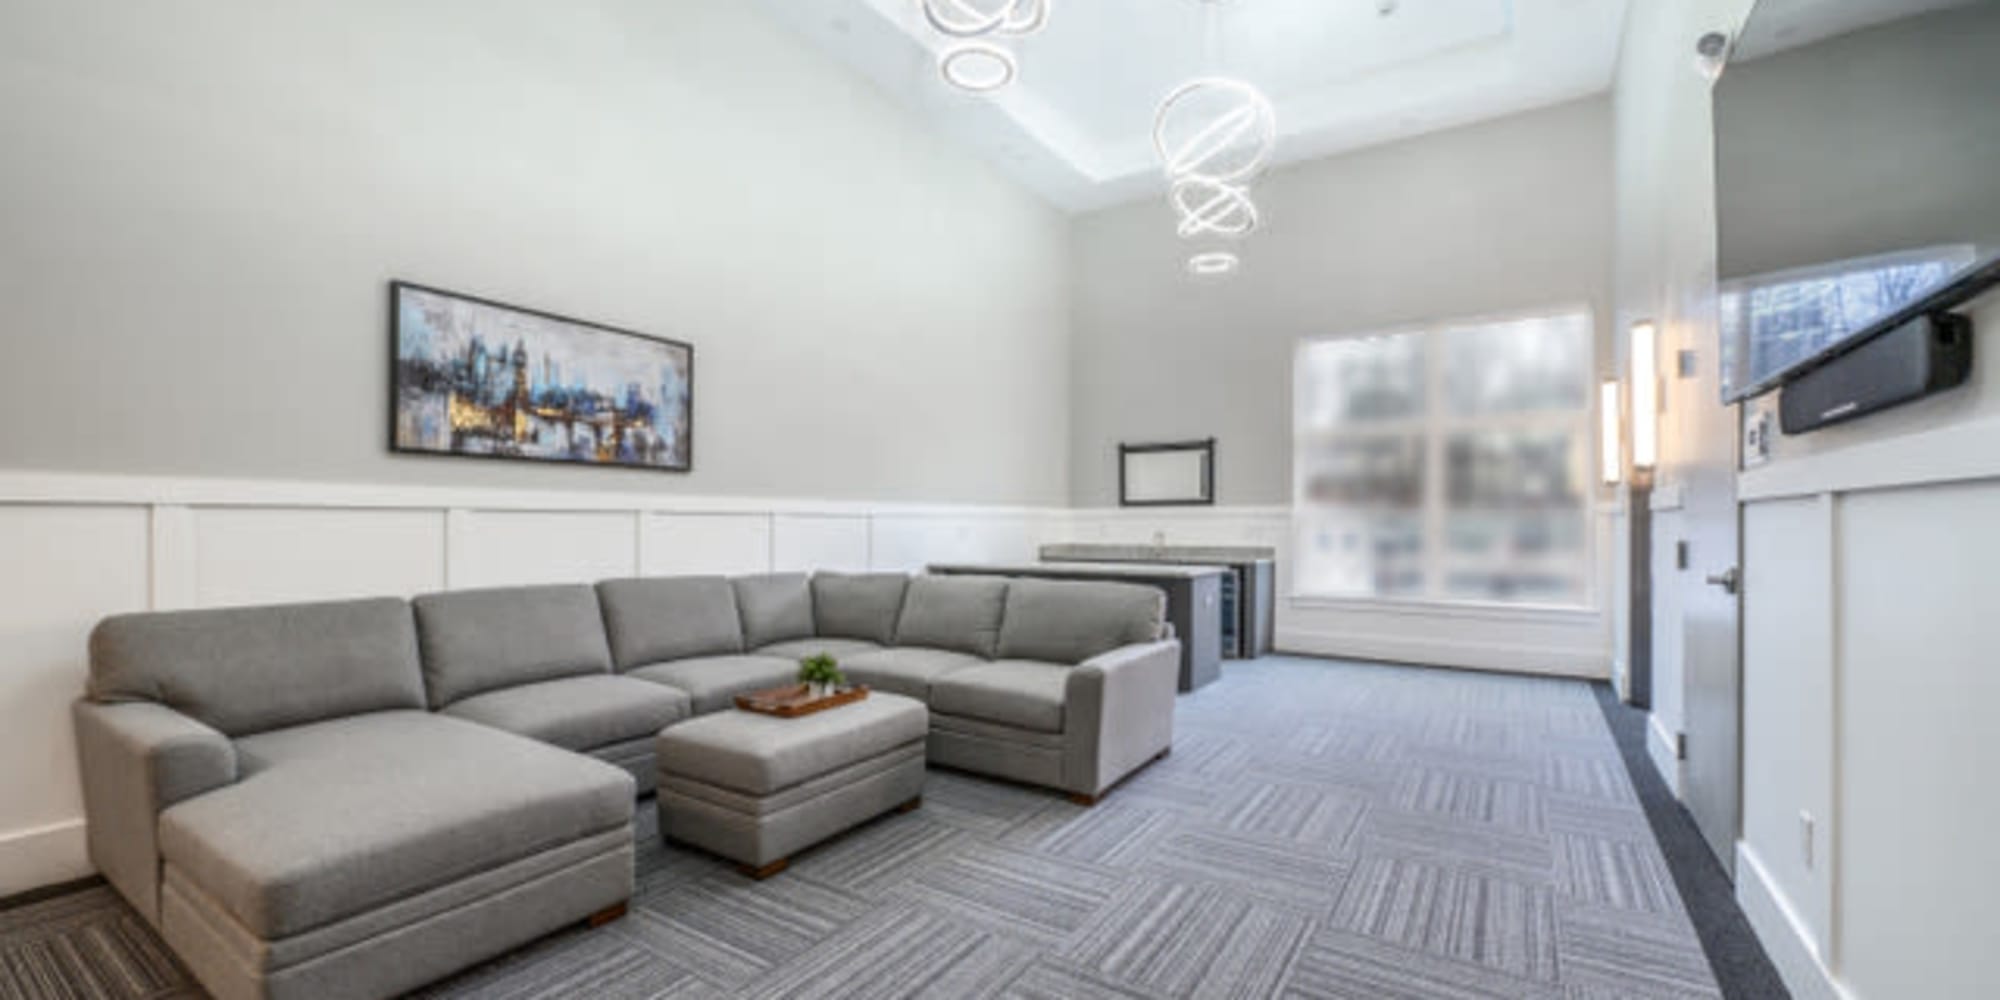 Our Modern Apartments in Cheshire, Connecticut showcase a Living Room